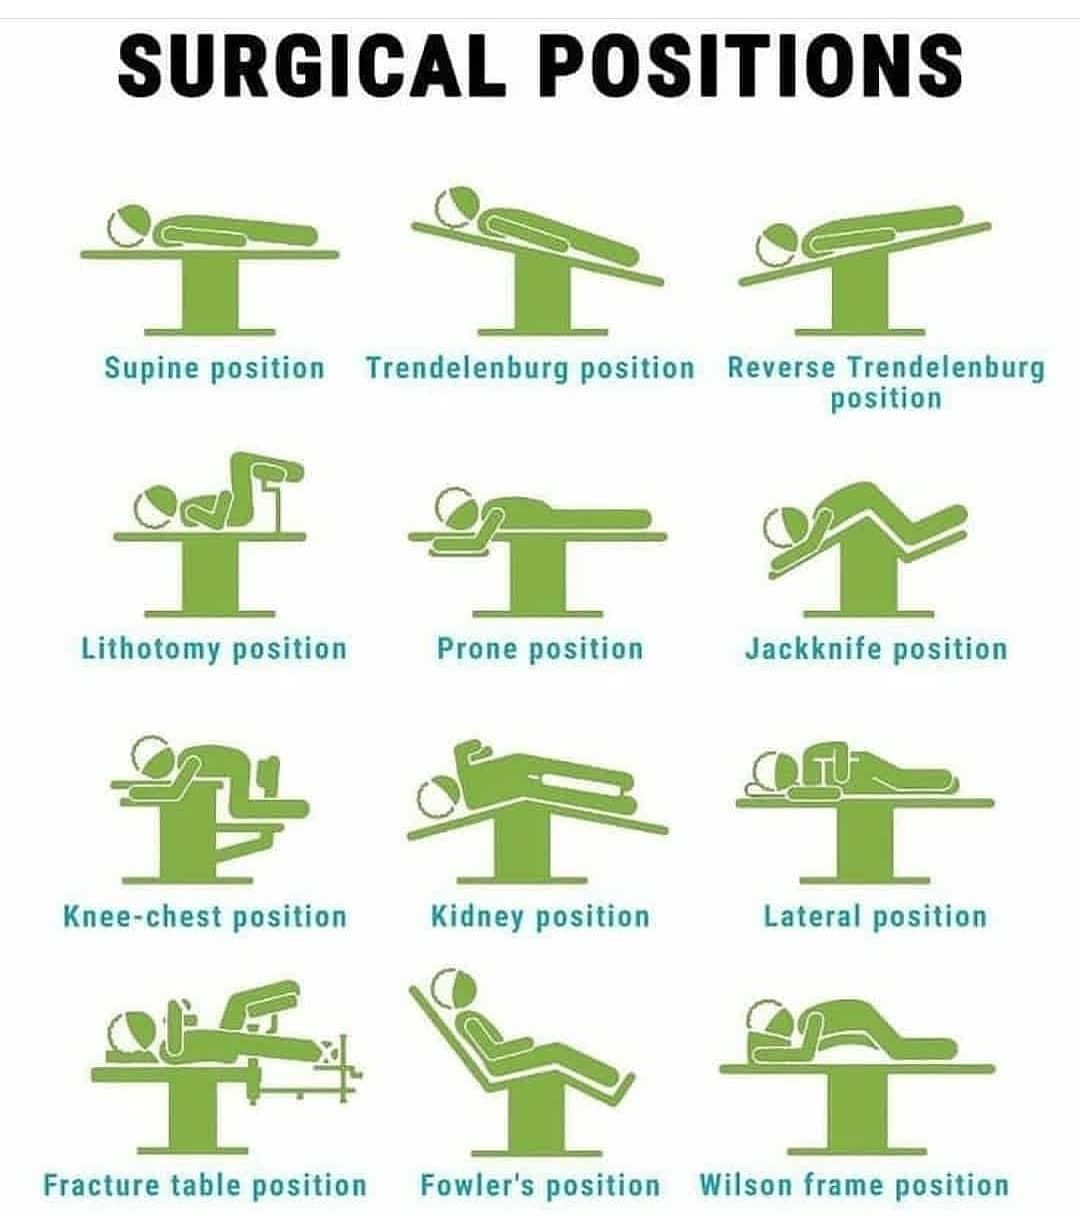 Different surgical positions